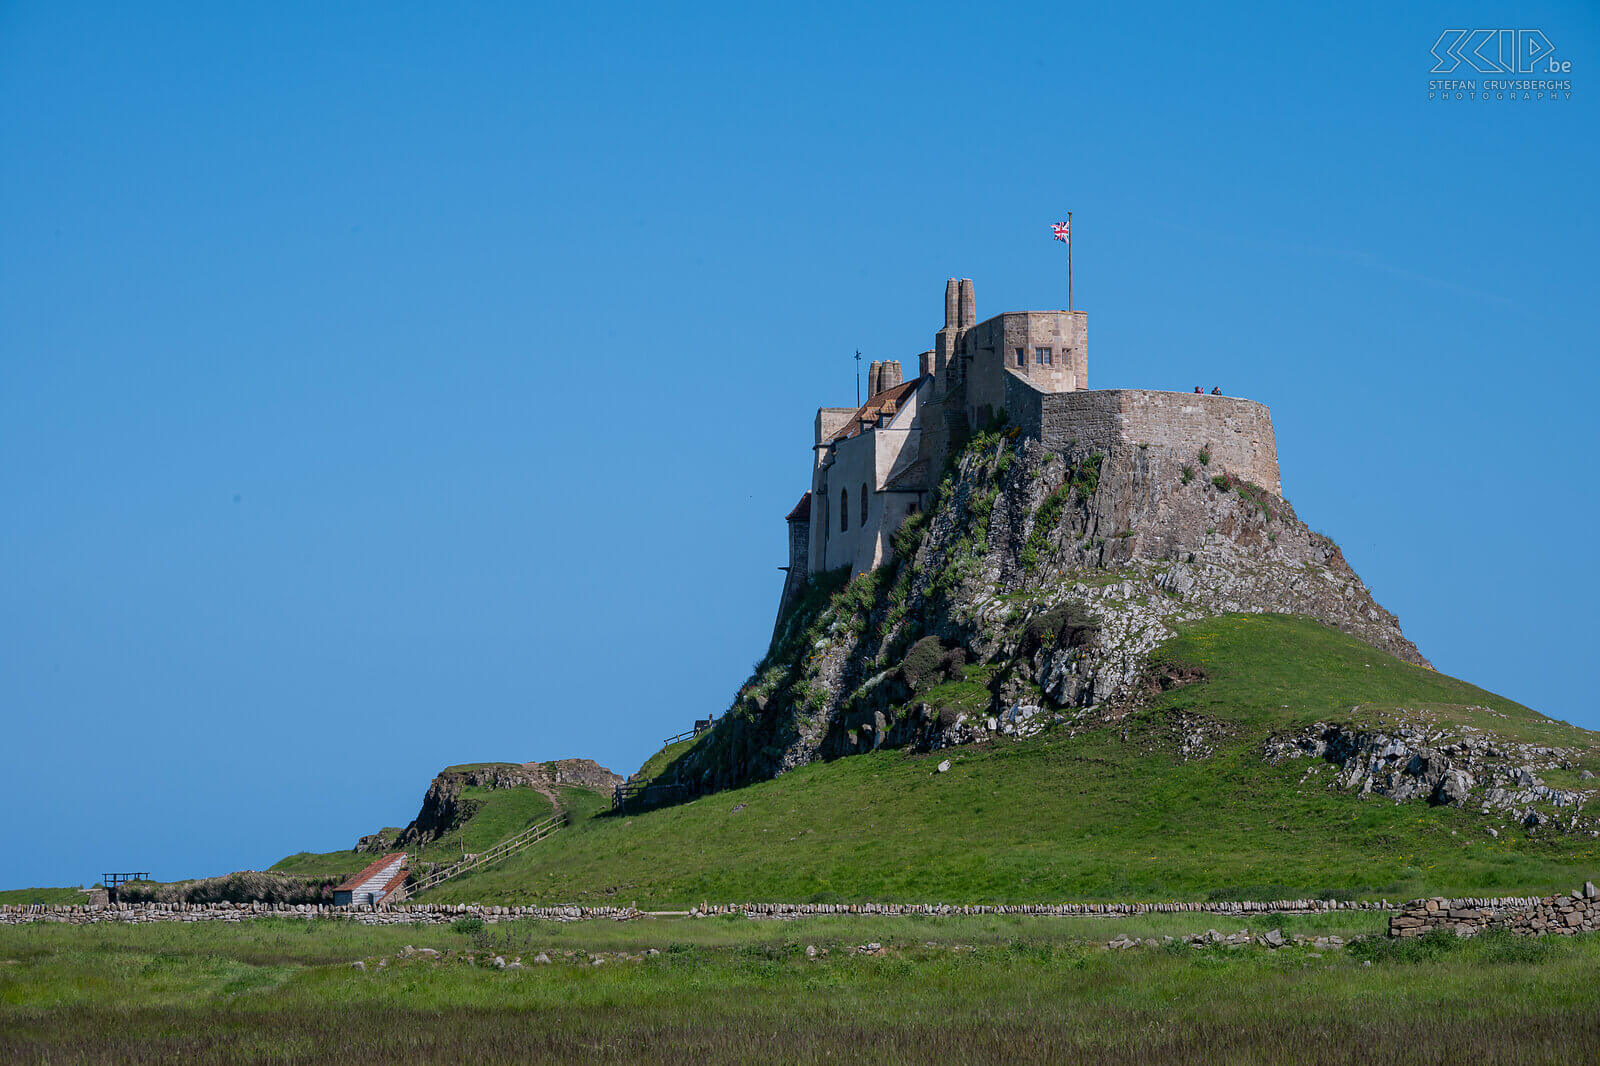 Lindisfarne Castle North of Seahouses on the English east coast you will find the impressive Holy Island, also called Lindisfarne: a rock island with beaches and mudflats and a castle. At high tide the island is completely surrounded by the North Sea. Stefan Cruysberghs